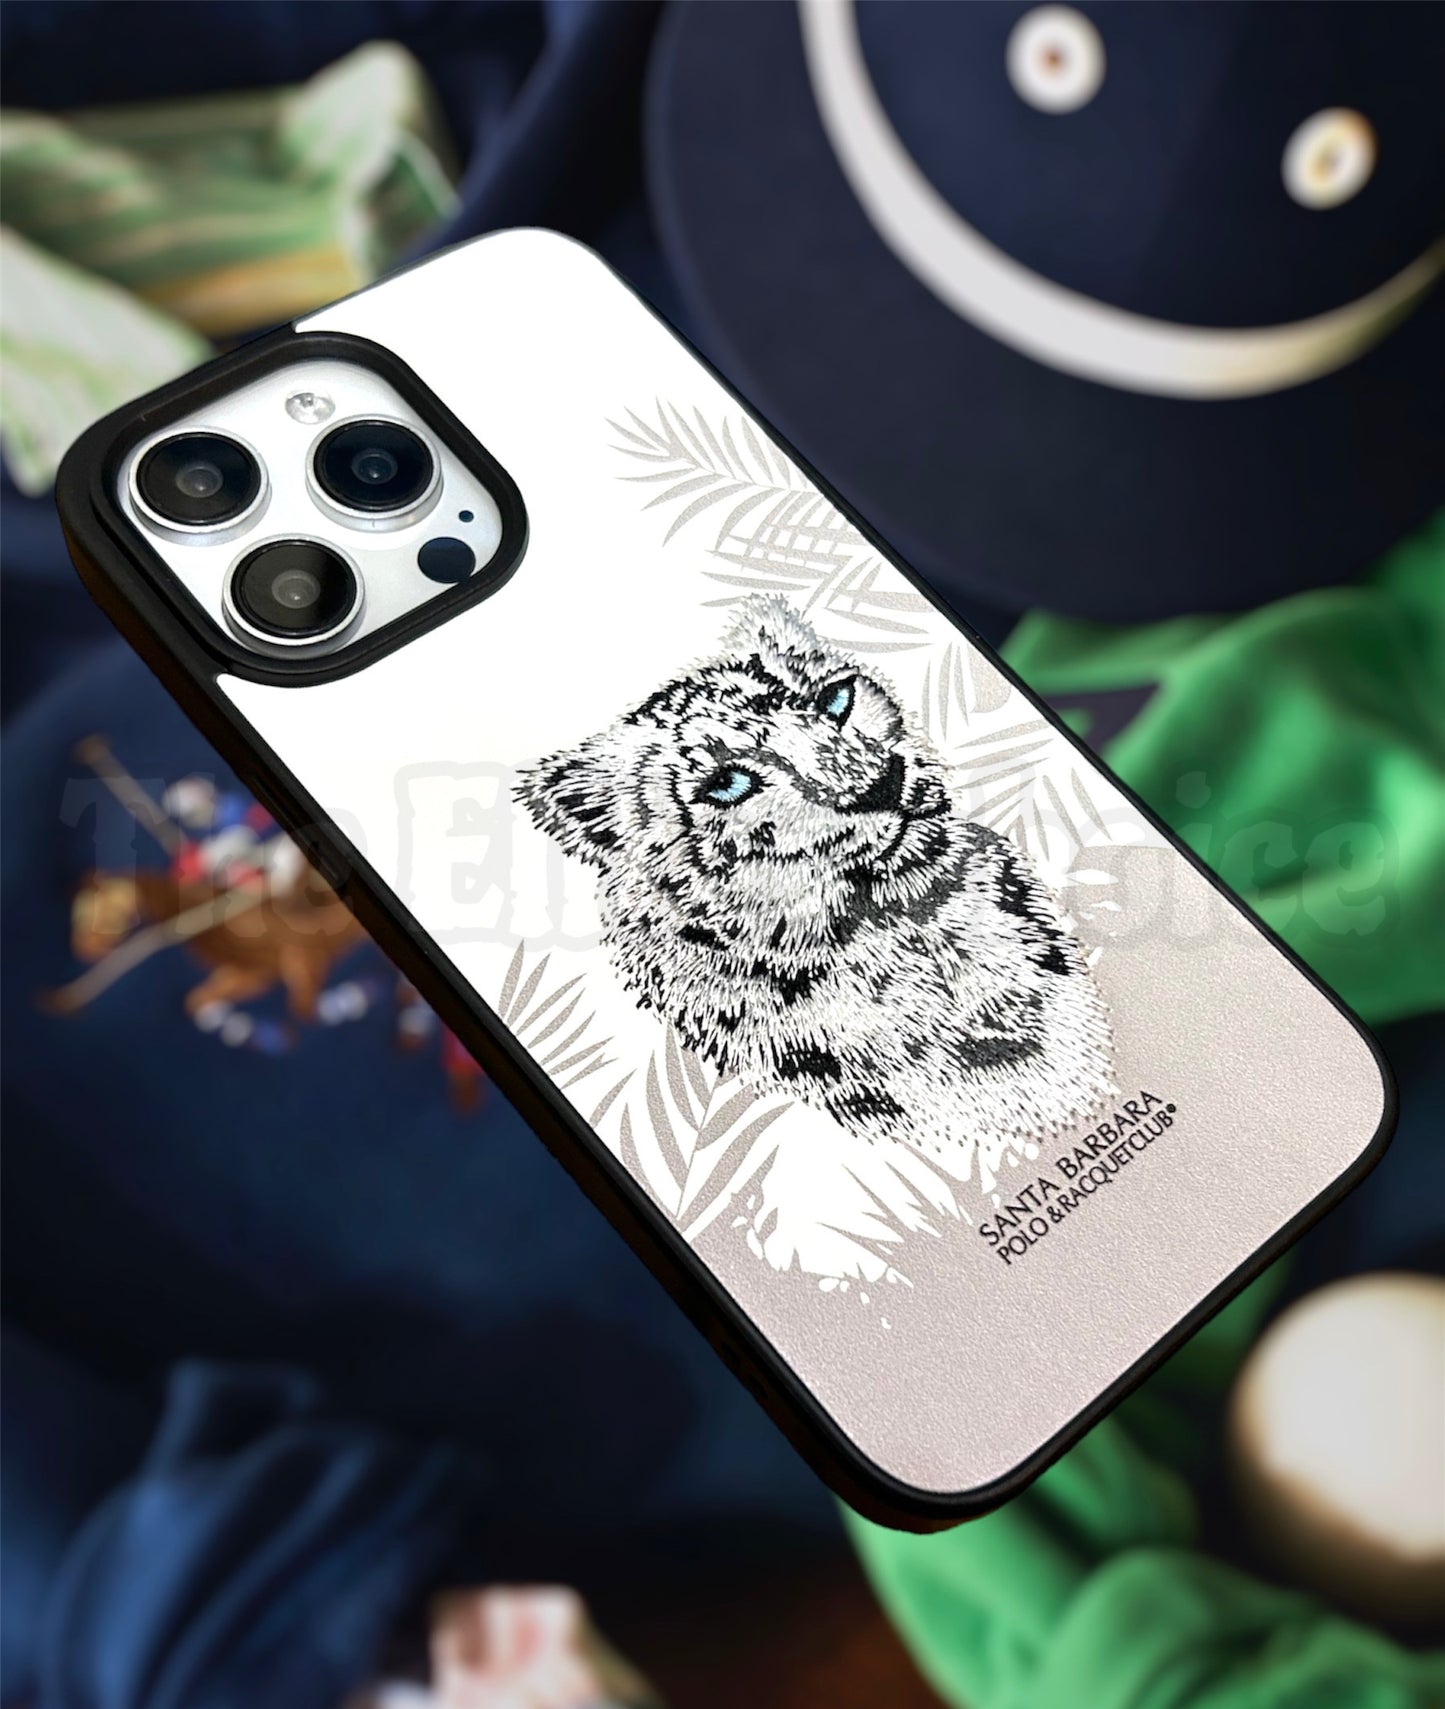 POLO iPhone cases